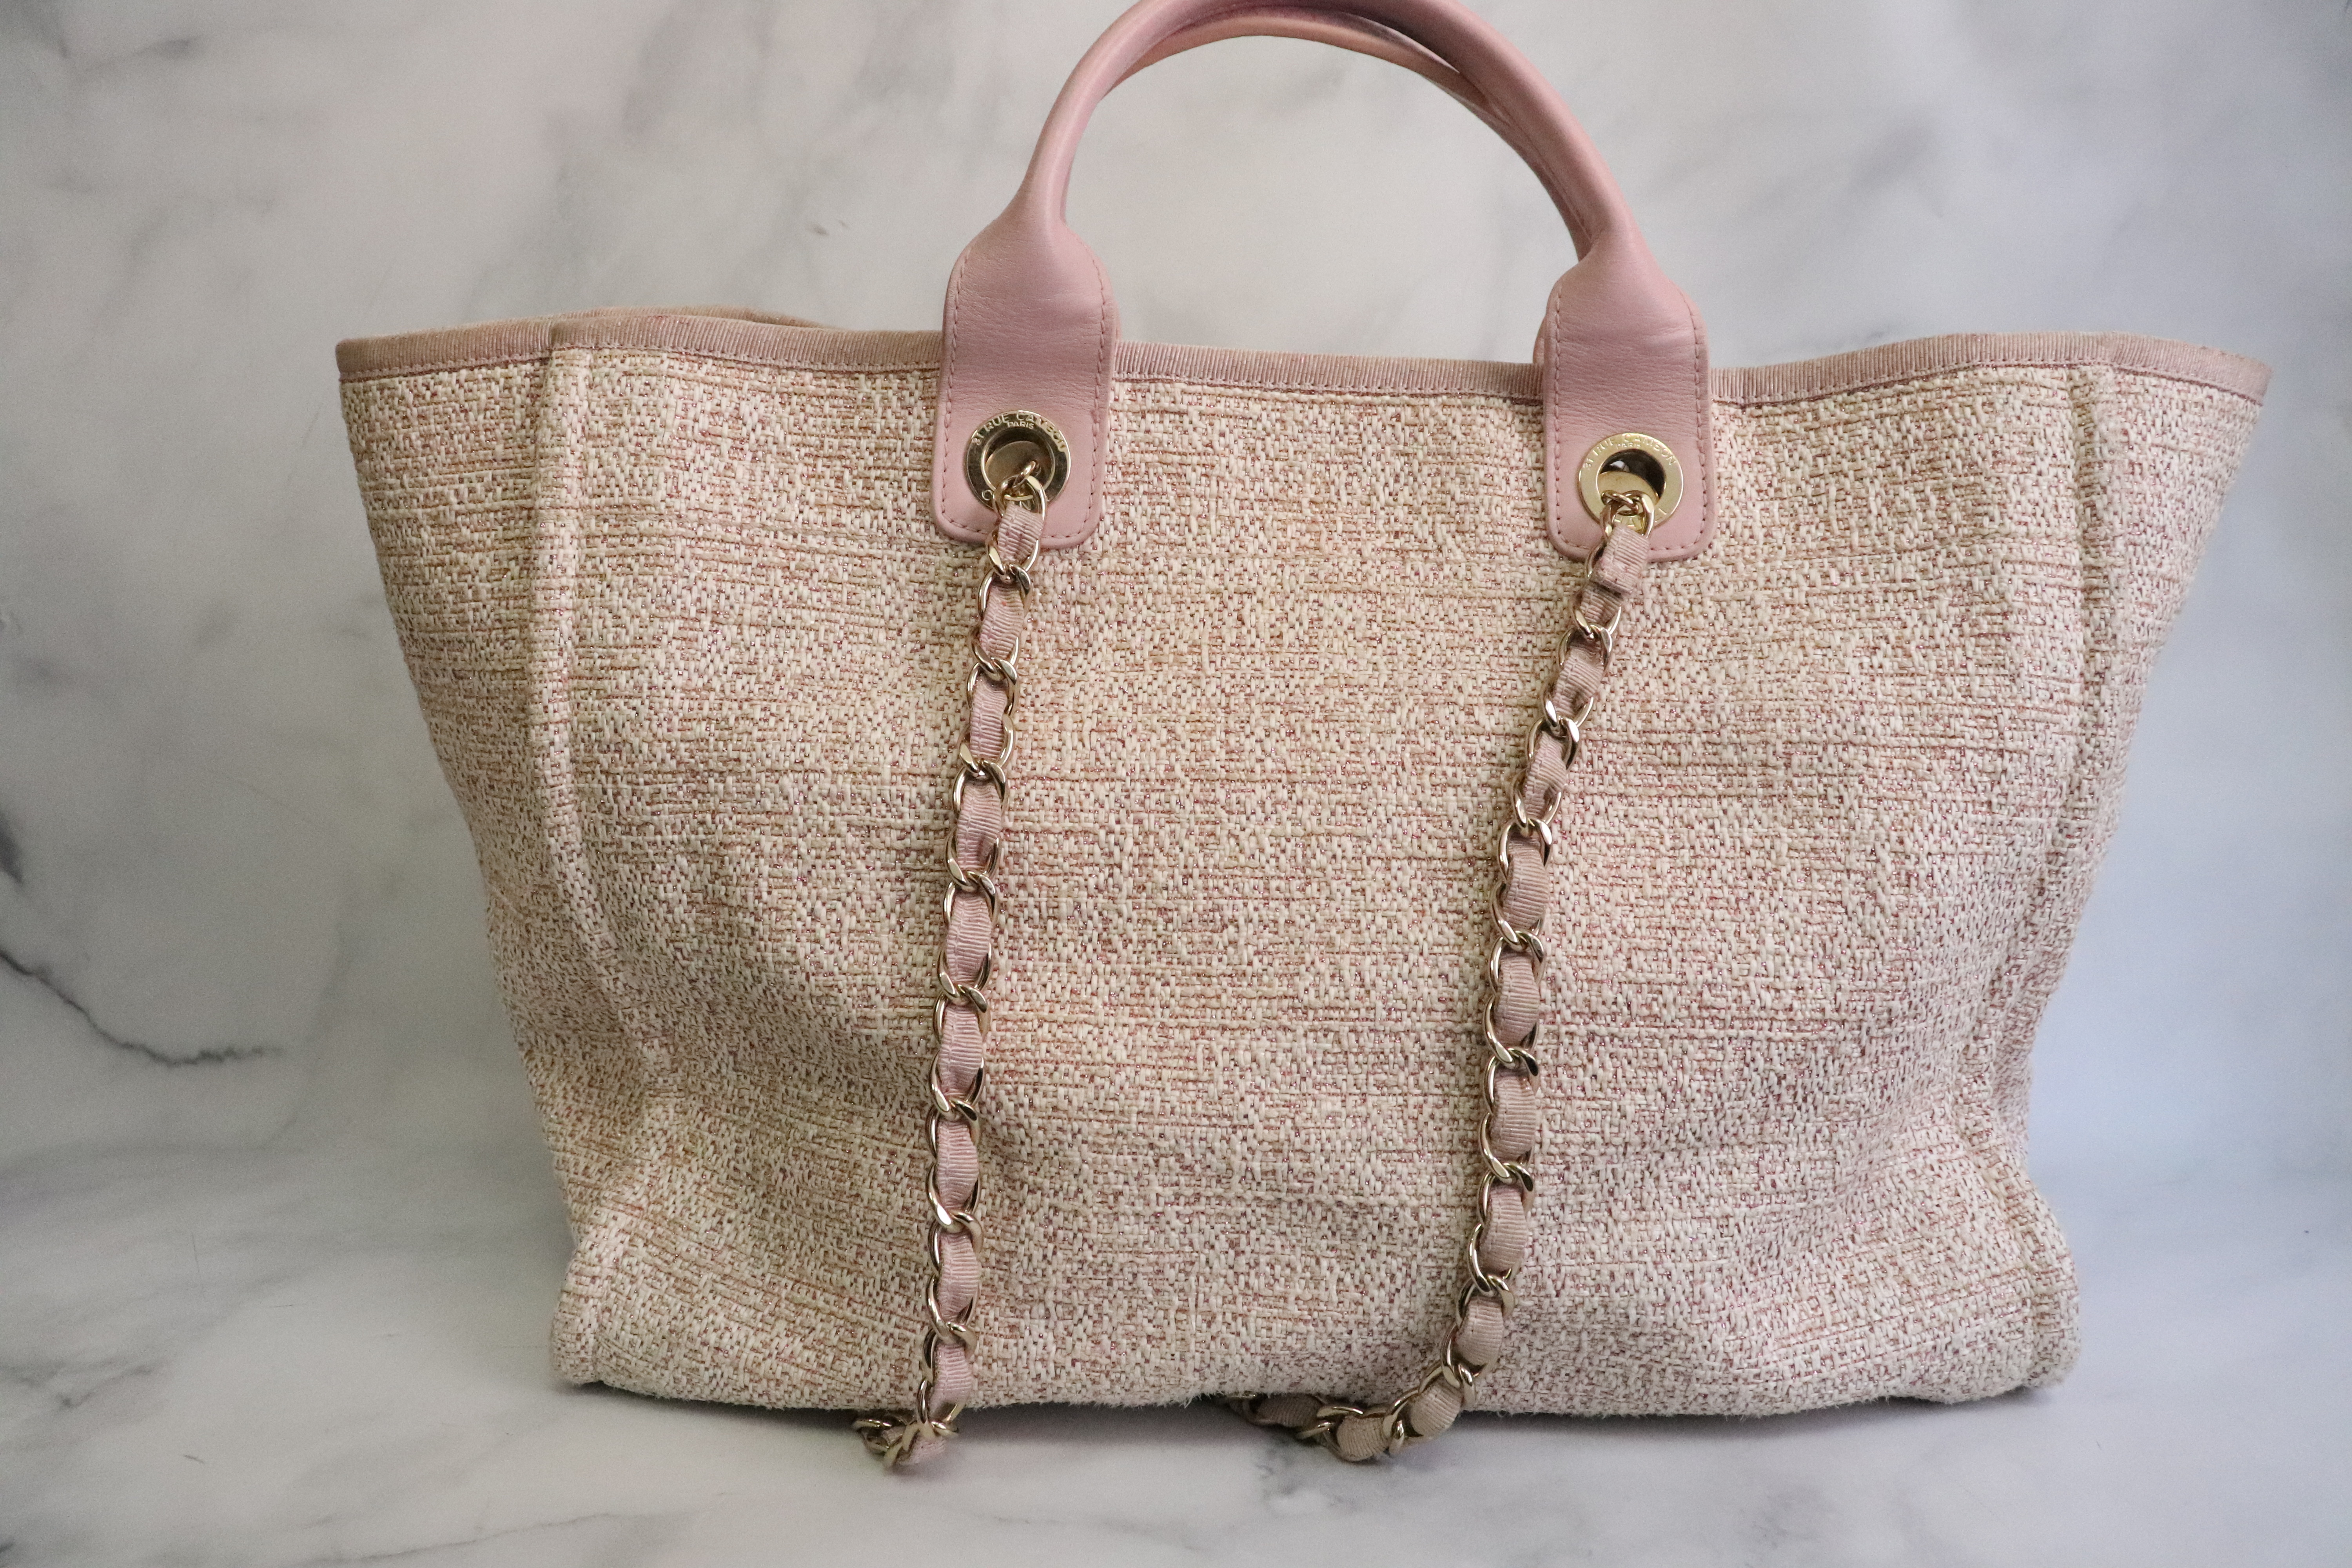 Chanel Deauville Tote Bag, Large, Pink Tweed, Shiny Gold Hardware